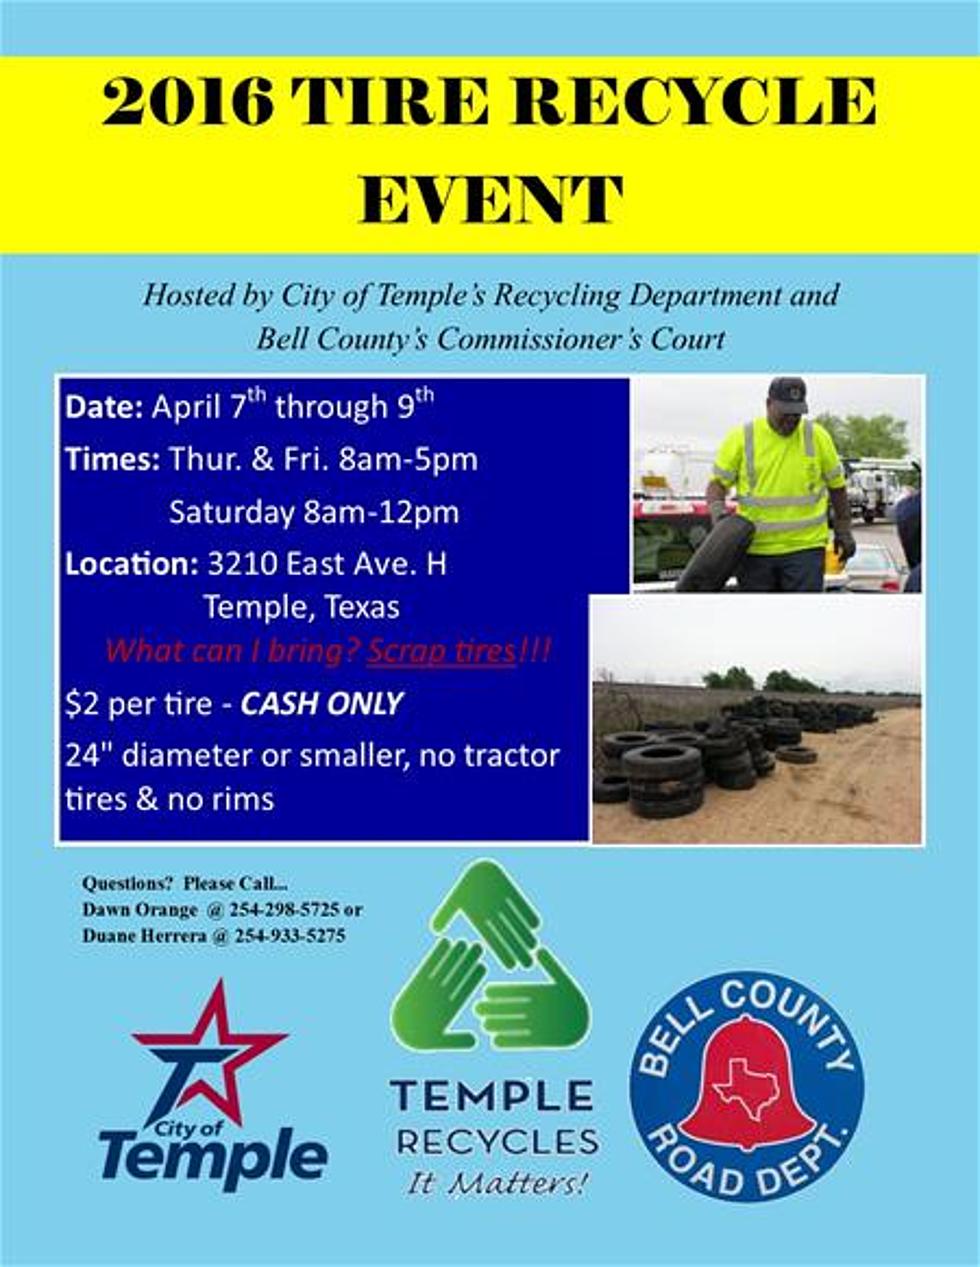 Recycle Your Old Tires in Temple Thursday Through Saturday